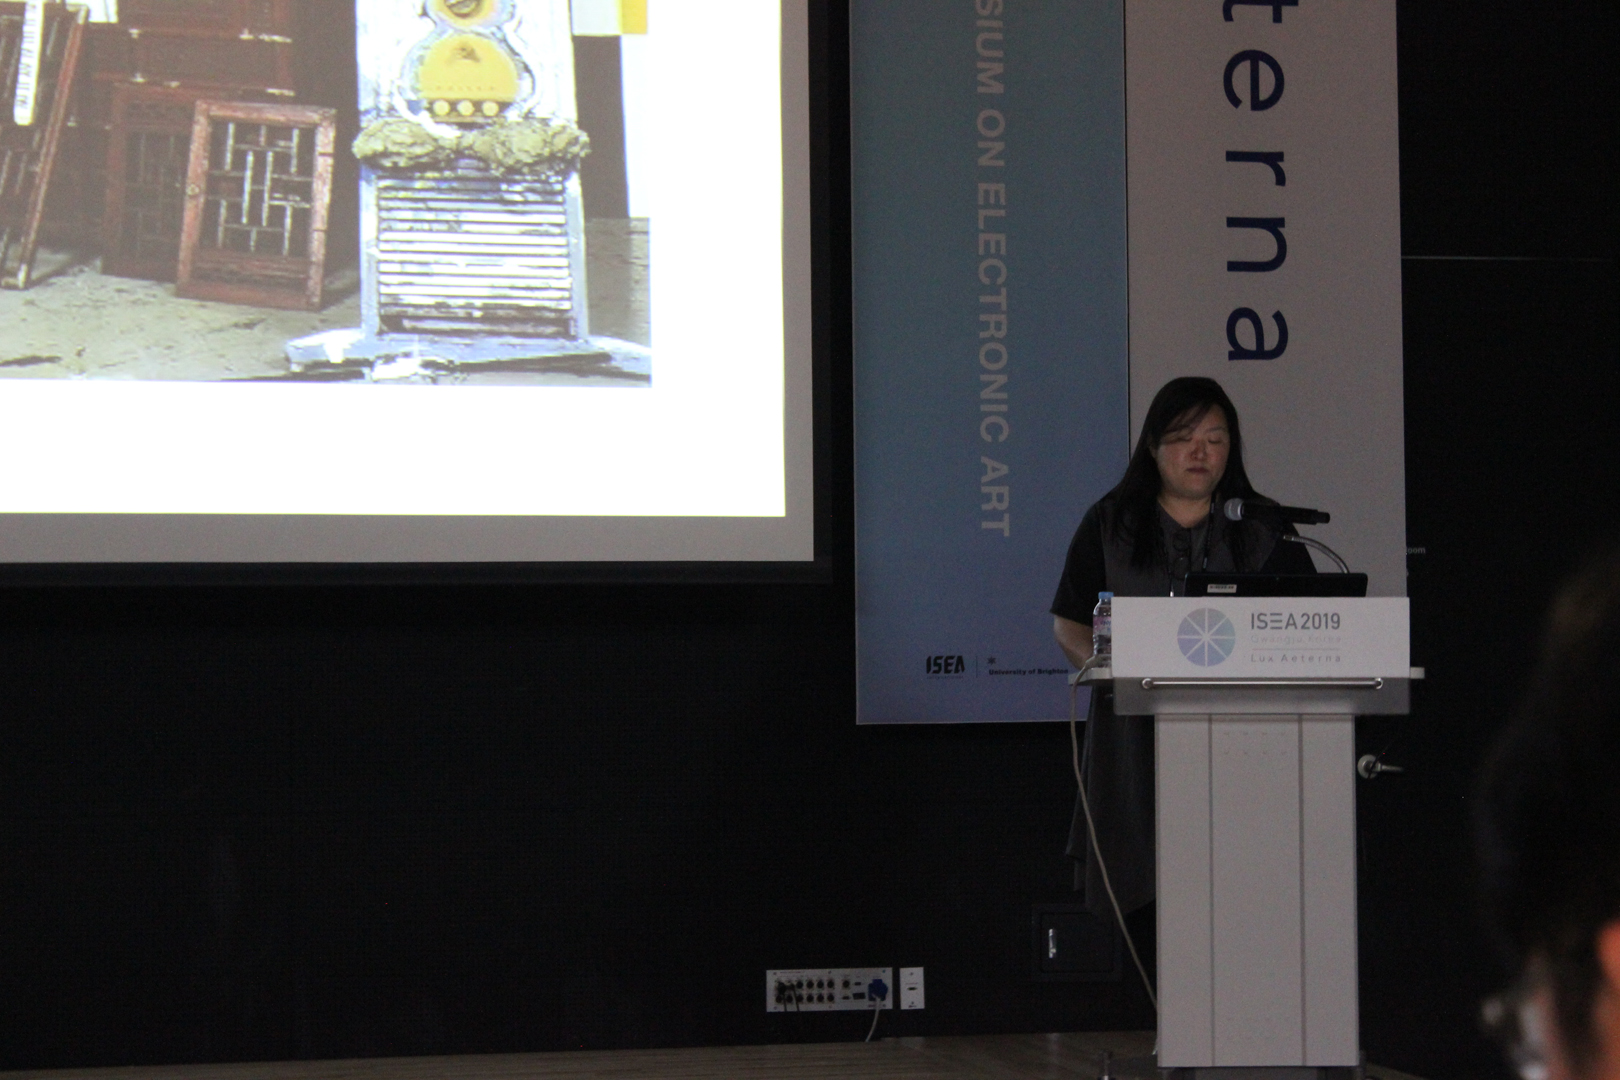 ©ISEA2019: 25th International Symposium on Electronic Art, Sook-Kyung Lee, Nam June Paik: Transforming Cultures, Connecting the World